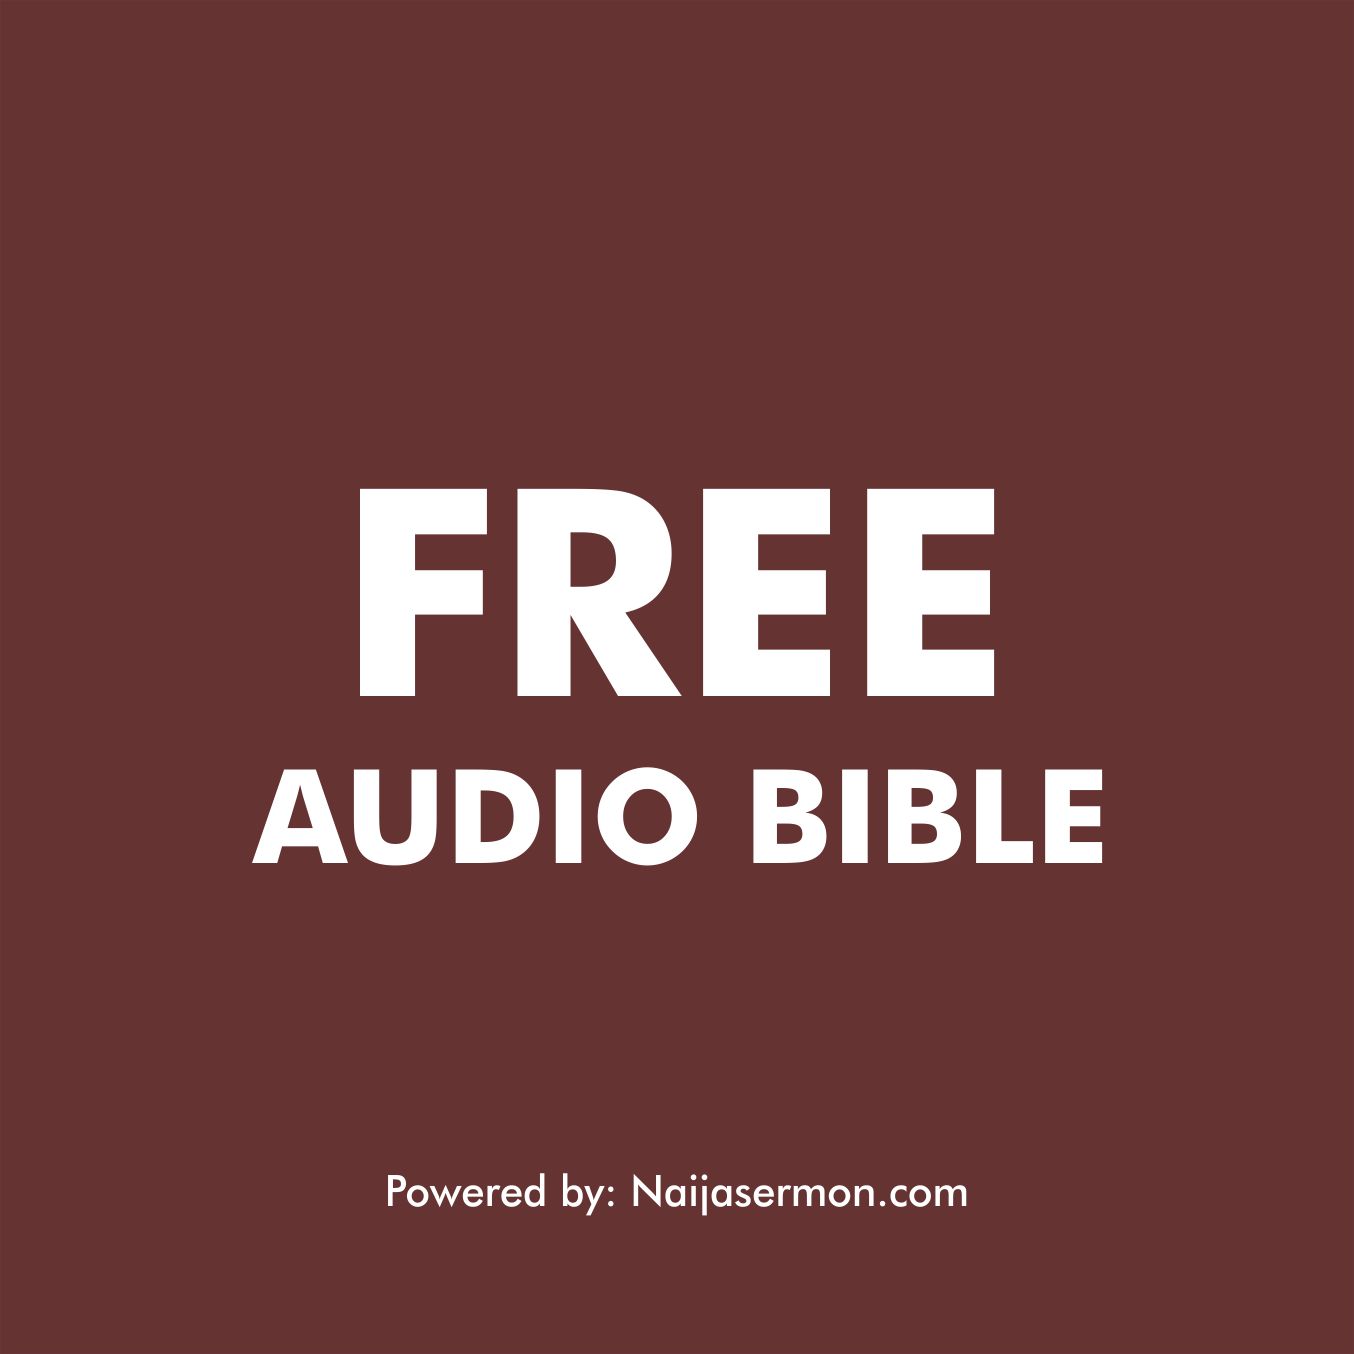 Audible bible free download download spatial sound